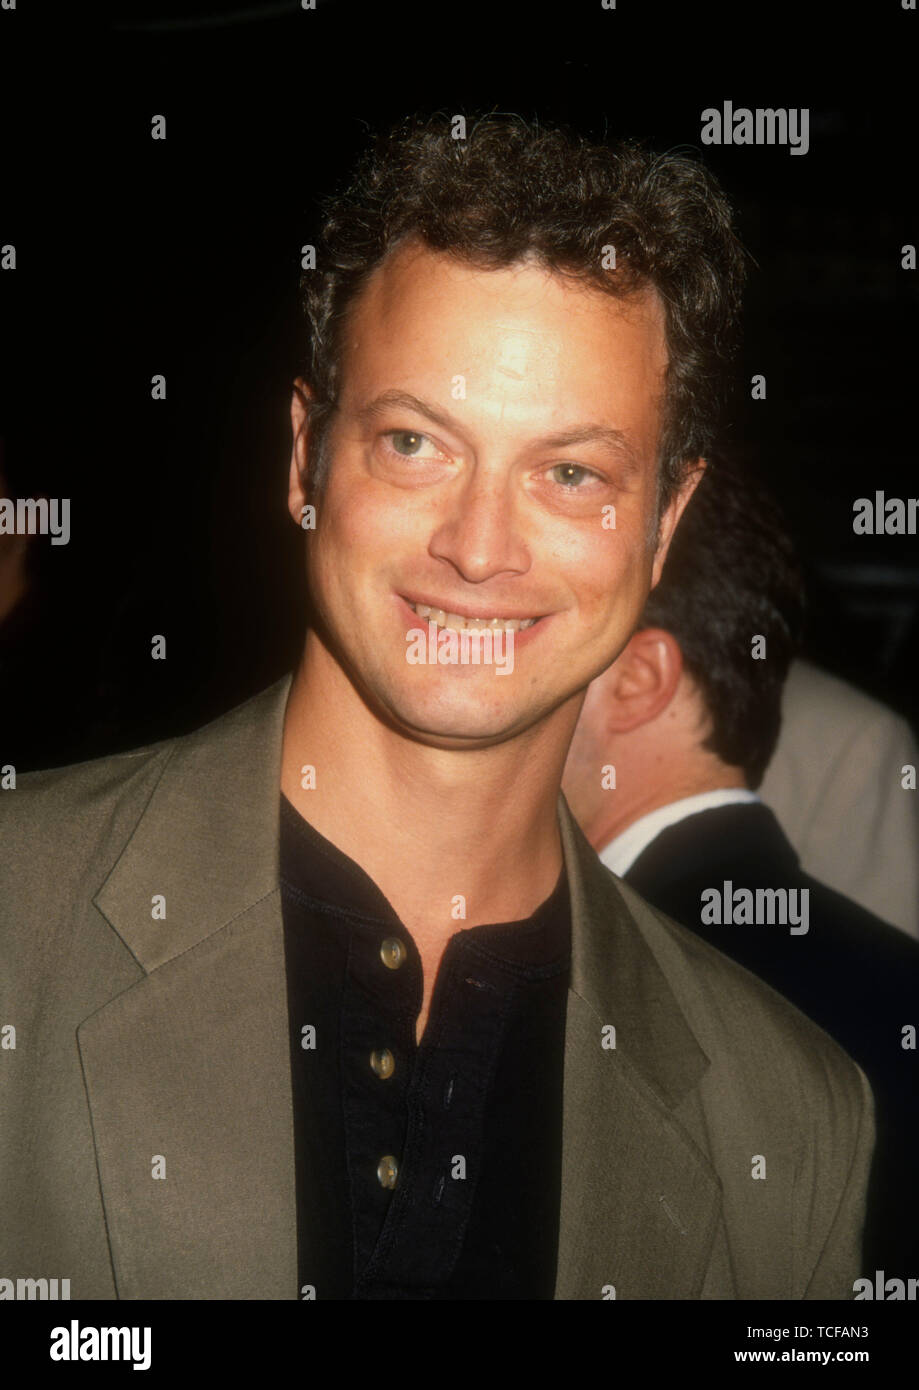 Hollywood, California, USA 7th June 1994 Actor Gary Sinise attends 20th Century Fox's 'Speed' Premiere on June 7, 1994 at Mann's Chinese Theatre in Hollywood, California, USA. Photo by Barry King/Alamy Stock Photo Stock Photo